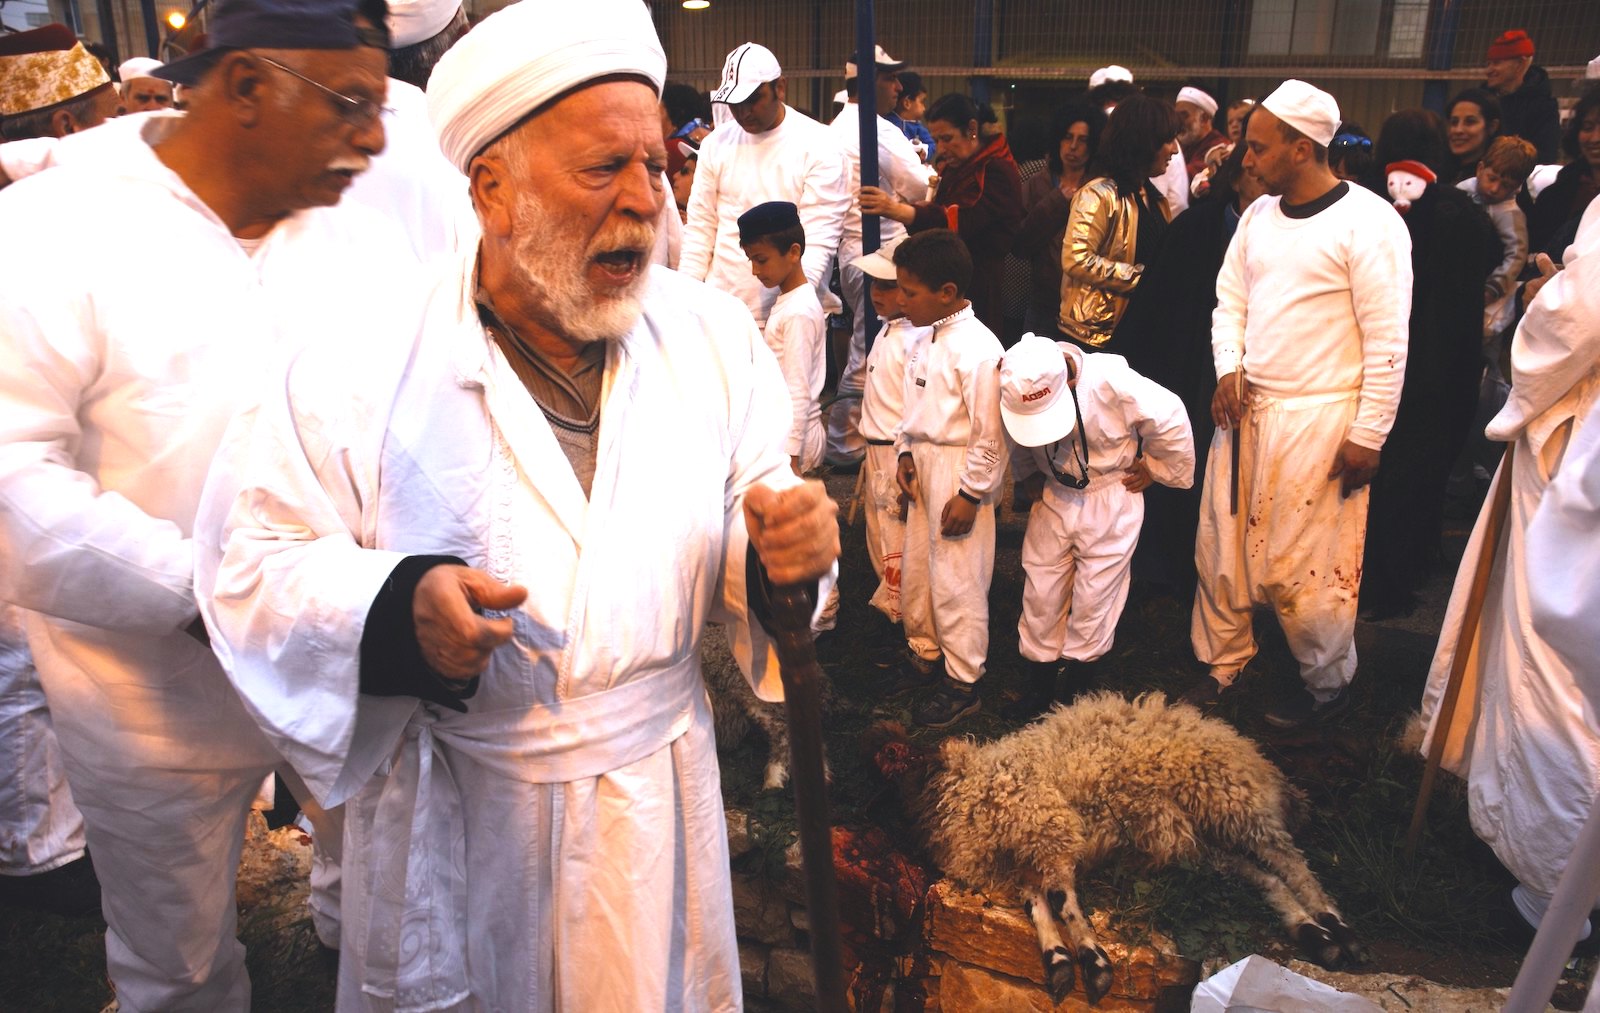 Man in a robe with an intense look on his face next to a slaughtered sheep with a crowd of peple.